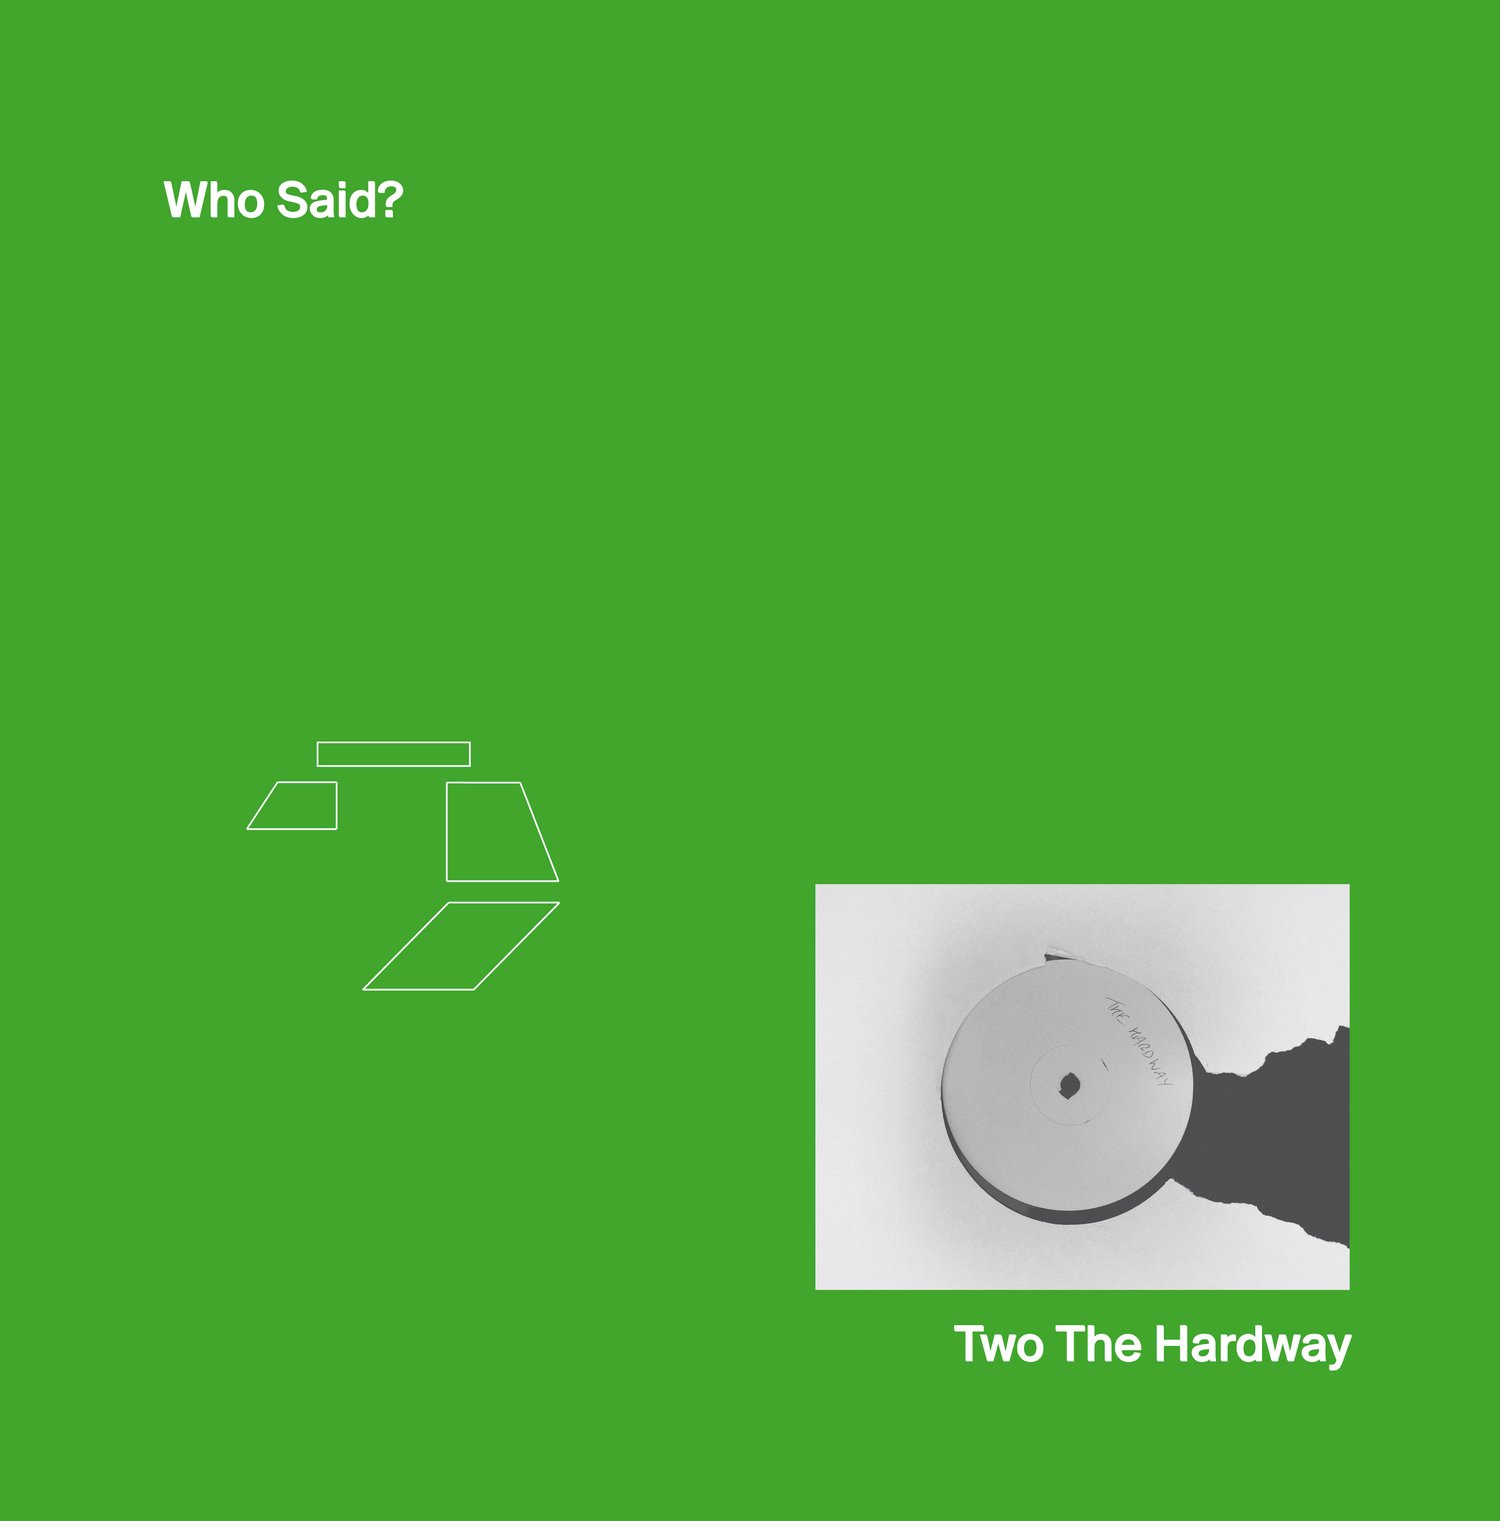 Two The Hardway - Who Said?